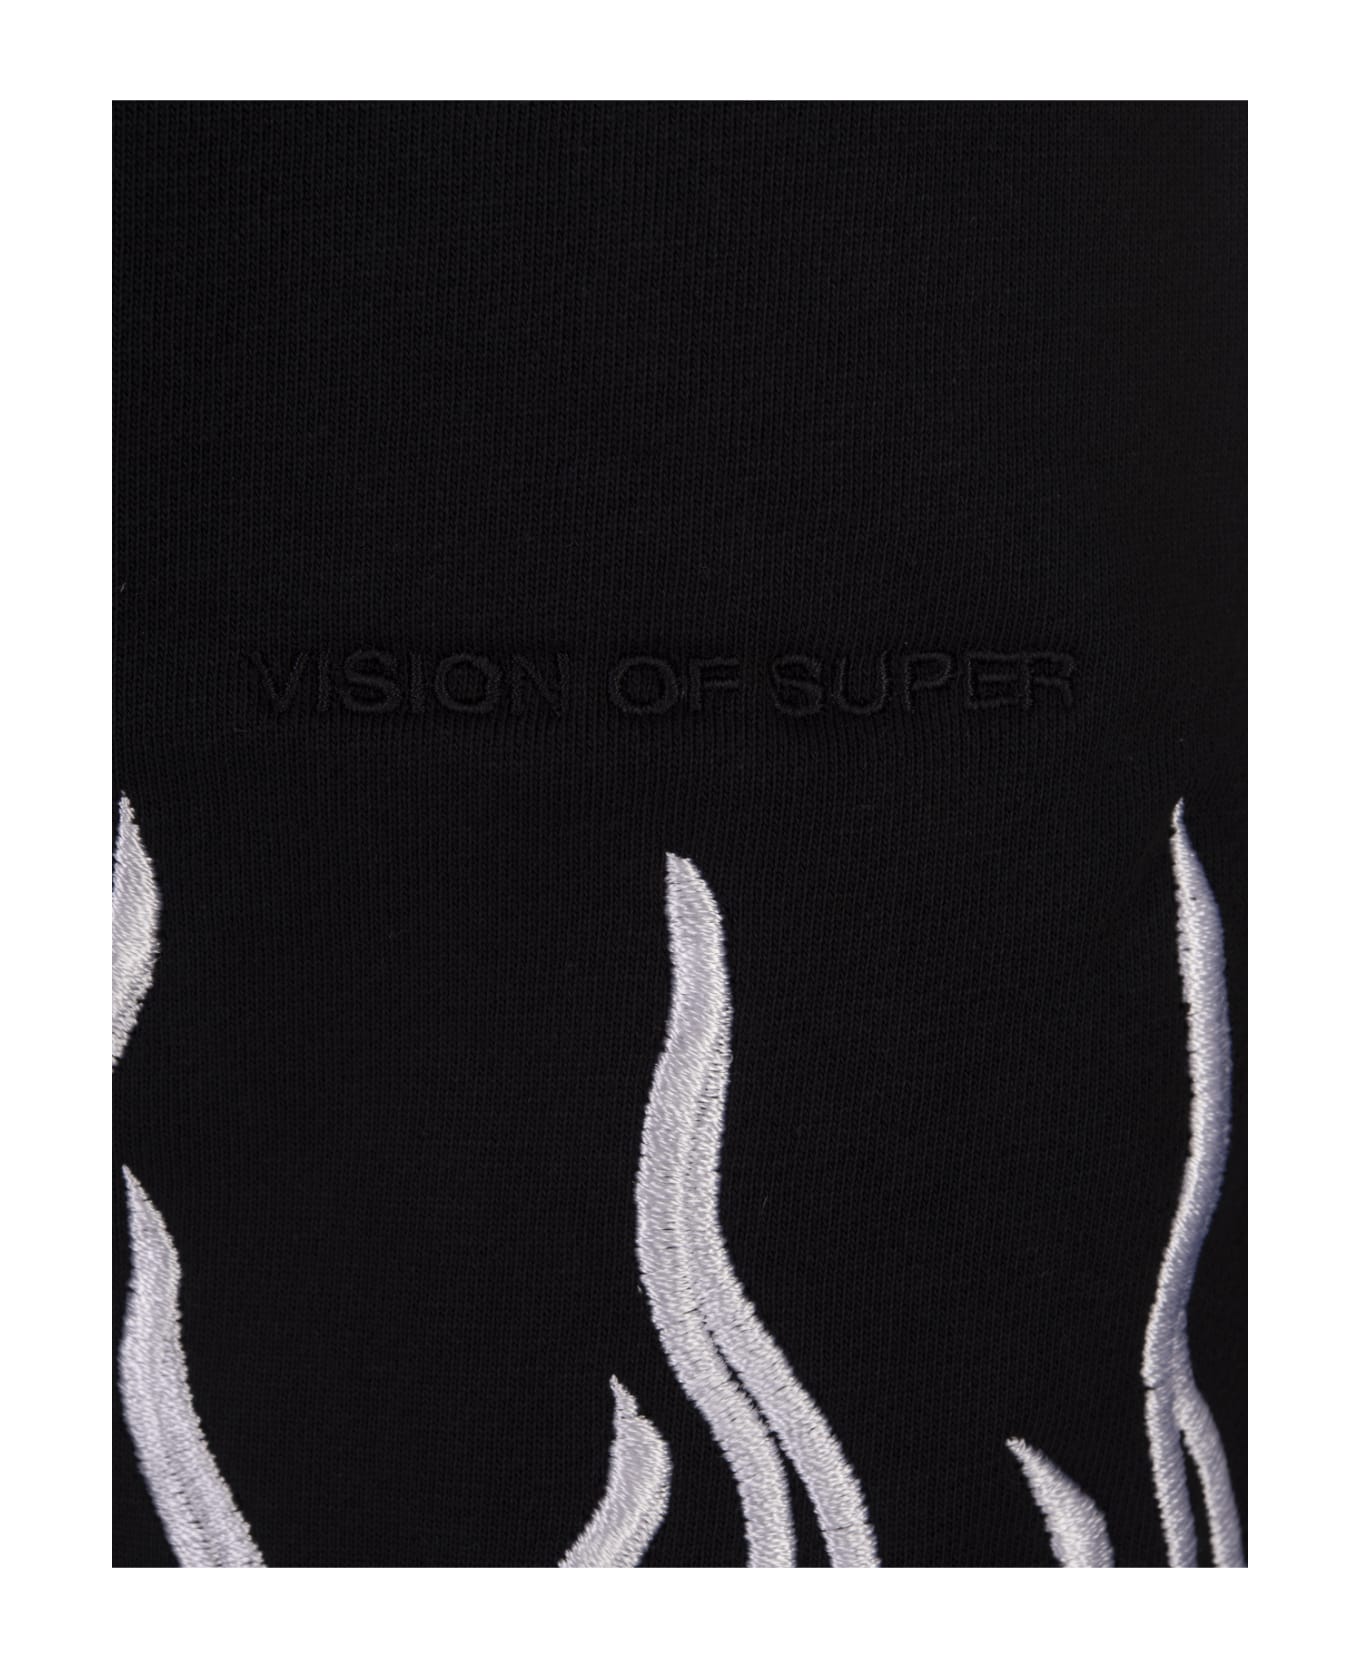 Vision of Super Black Shorts With Embroidered White Flames - Black ショートパンツ